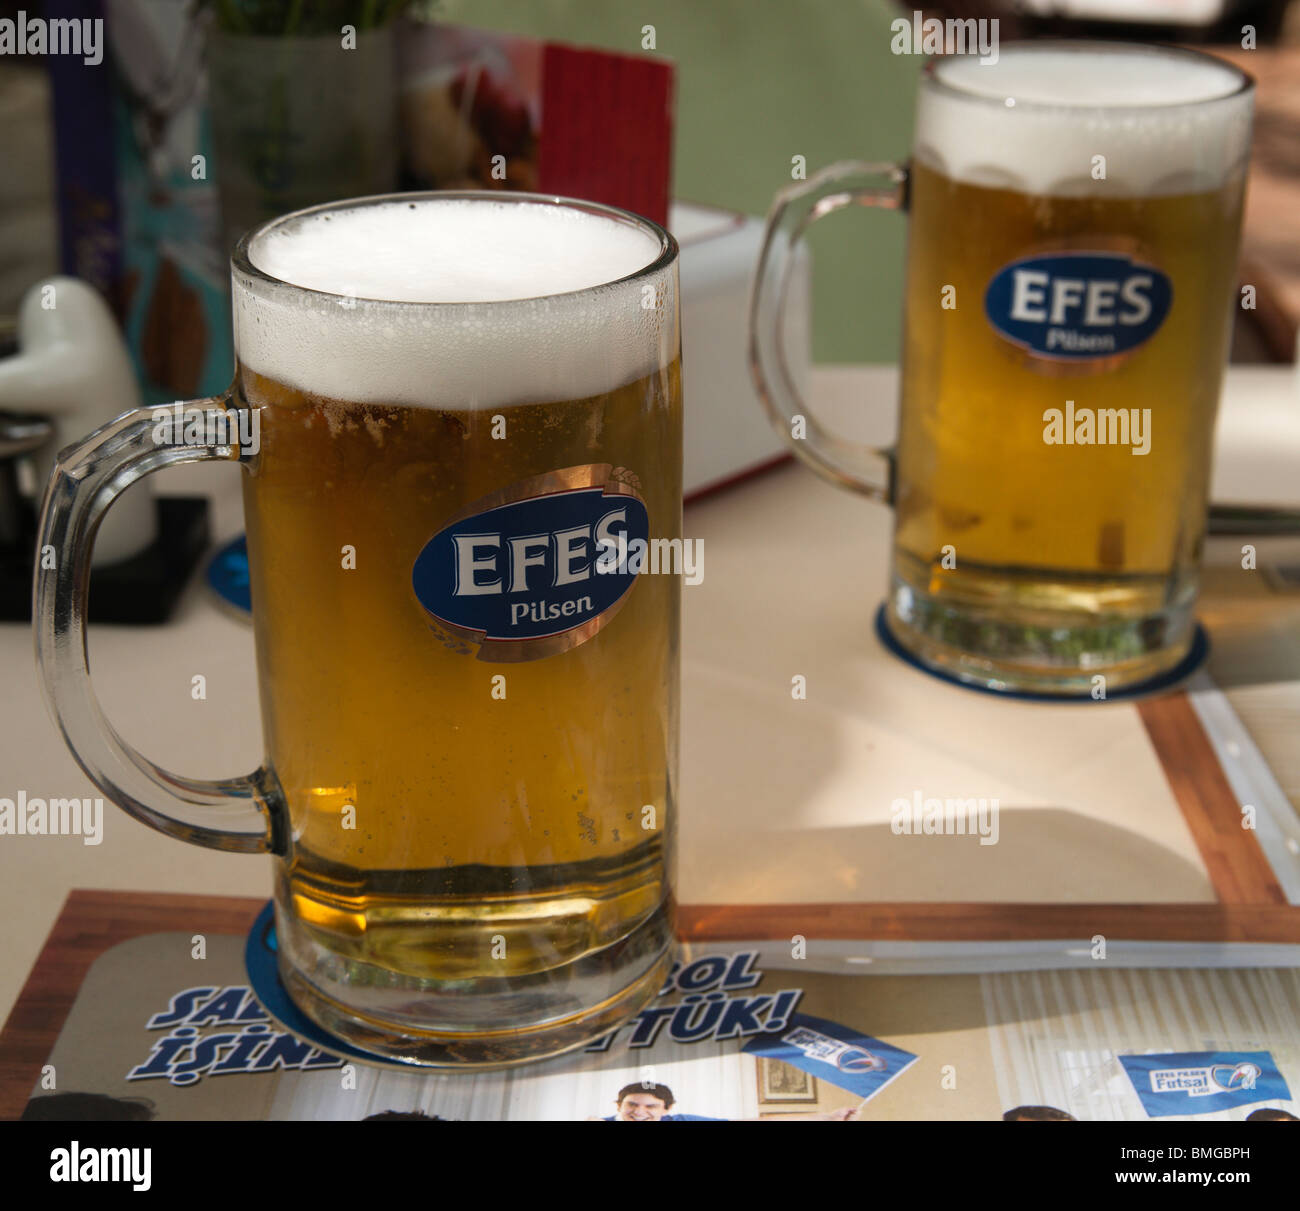 Efes Beer High Resolution Stock Photography and Images - Alamy